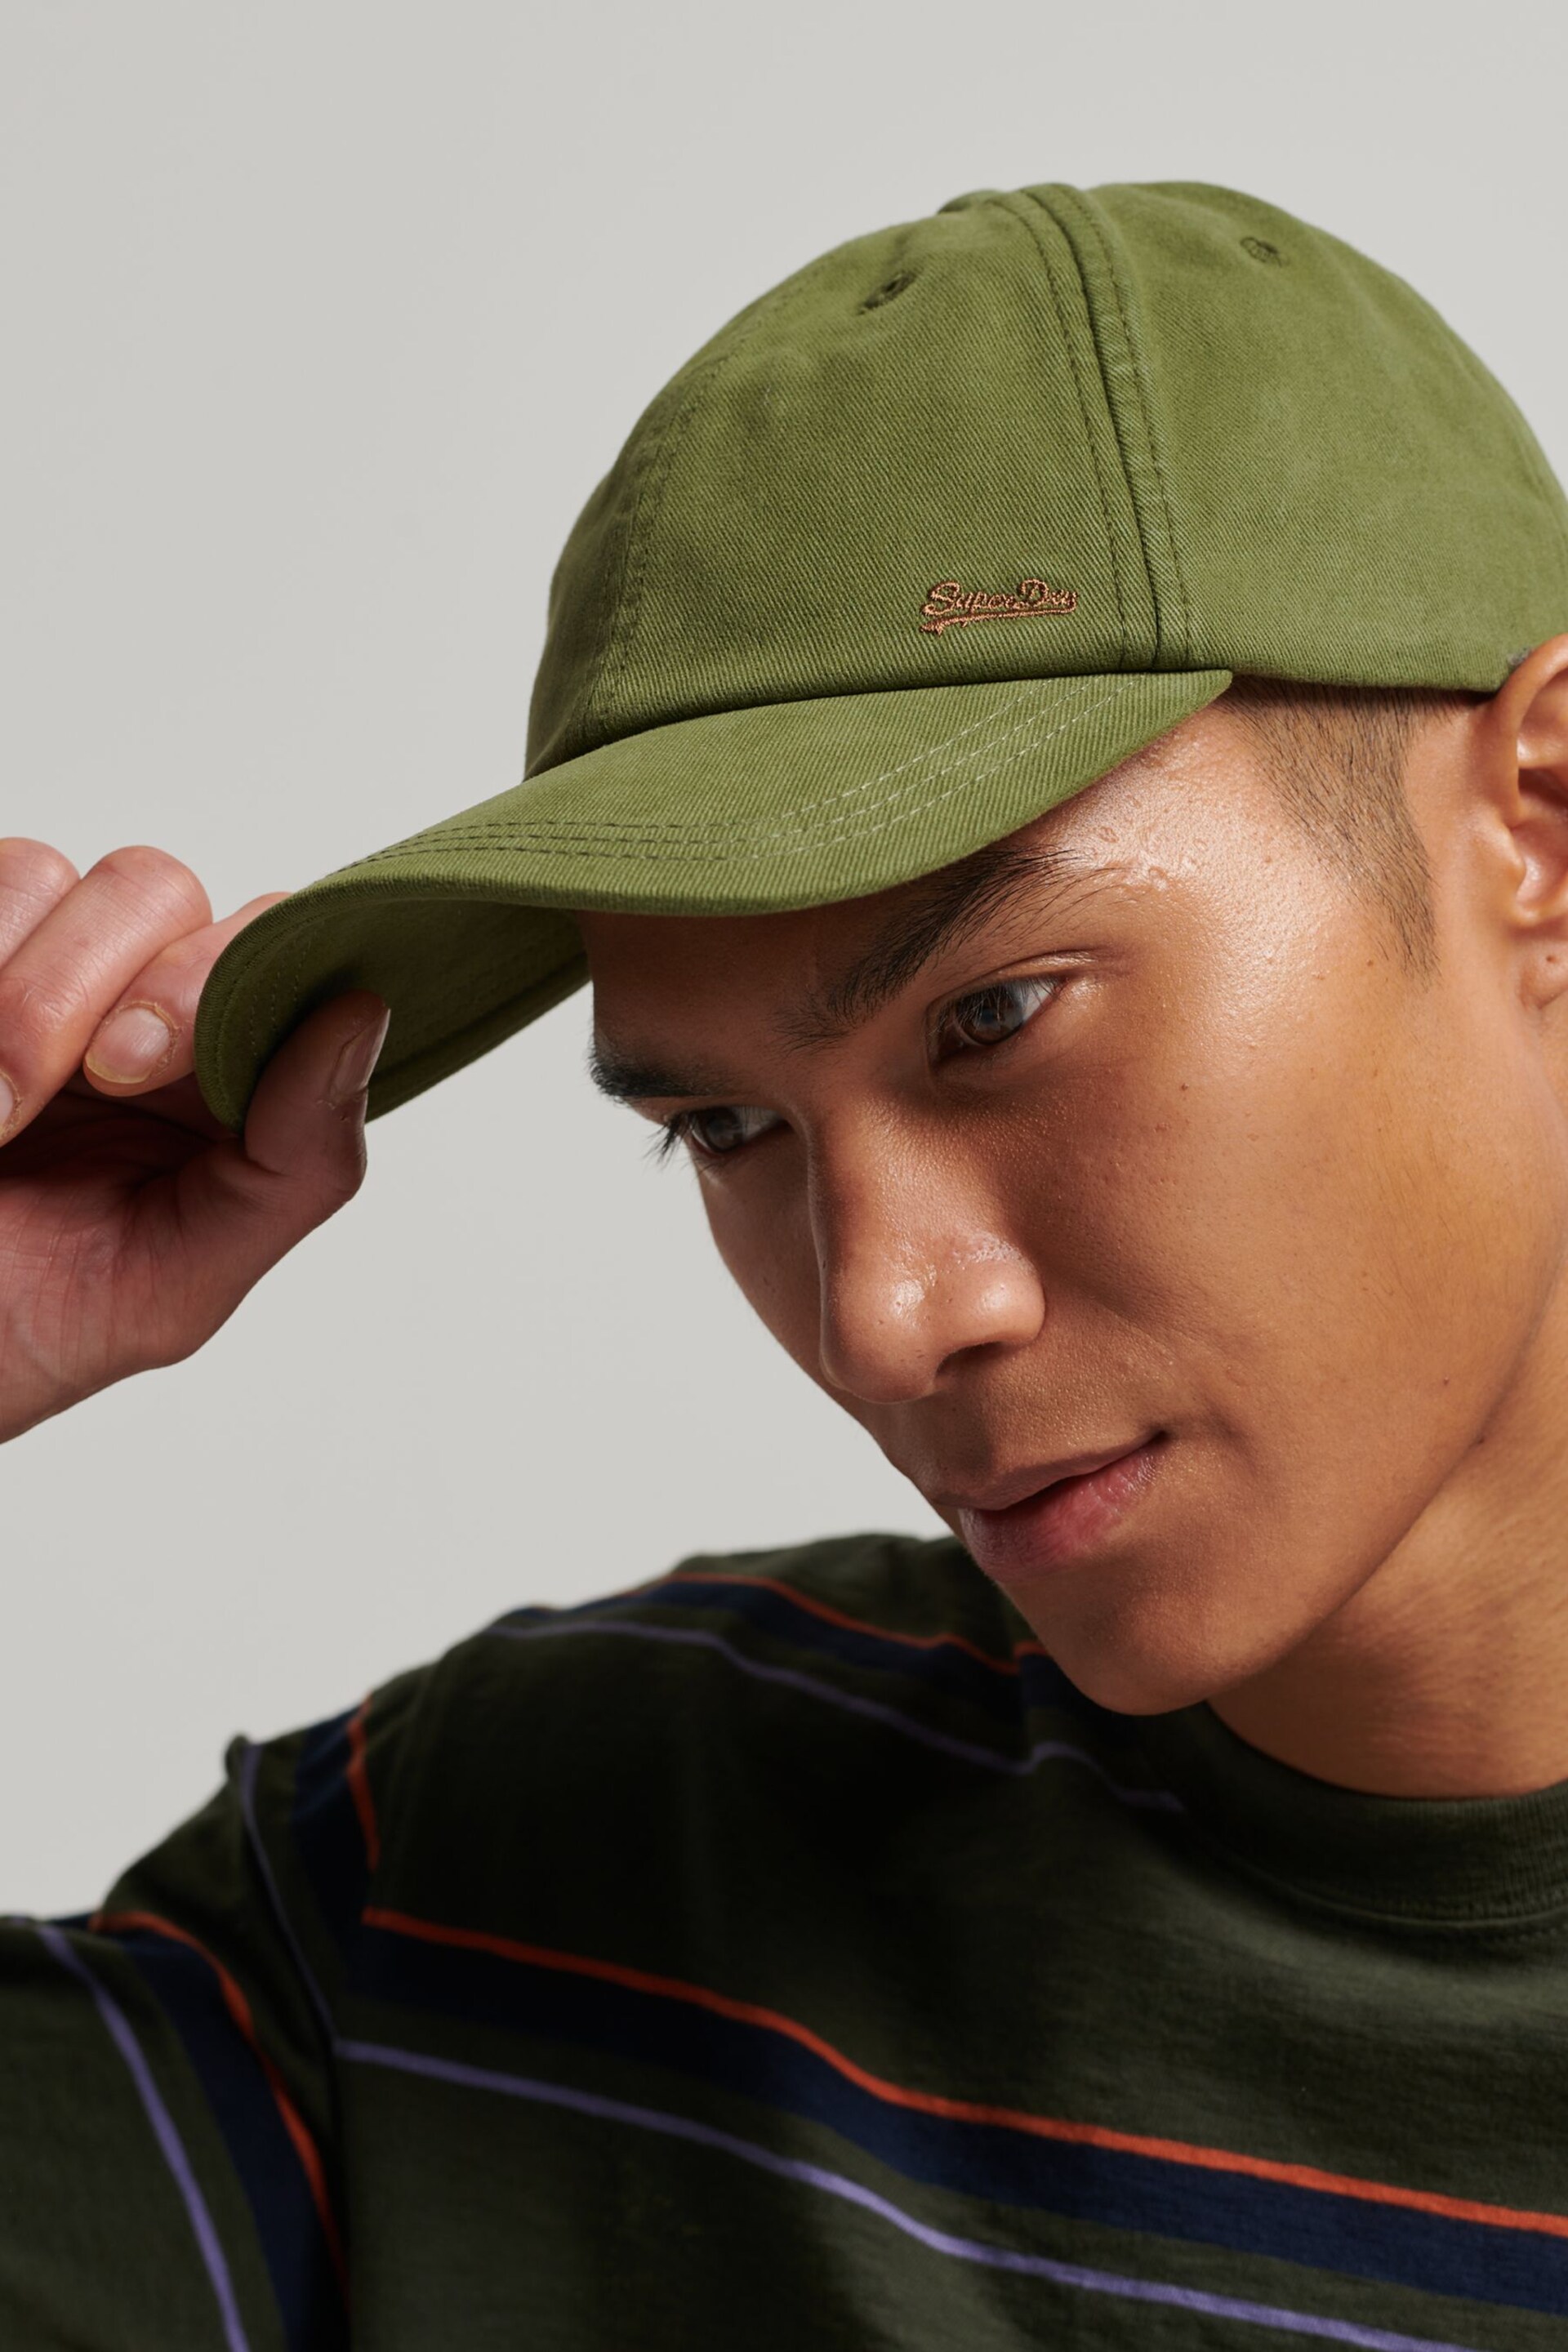 Superdry Green Vintage Embroidered Cap - Image 4 of 4